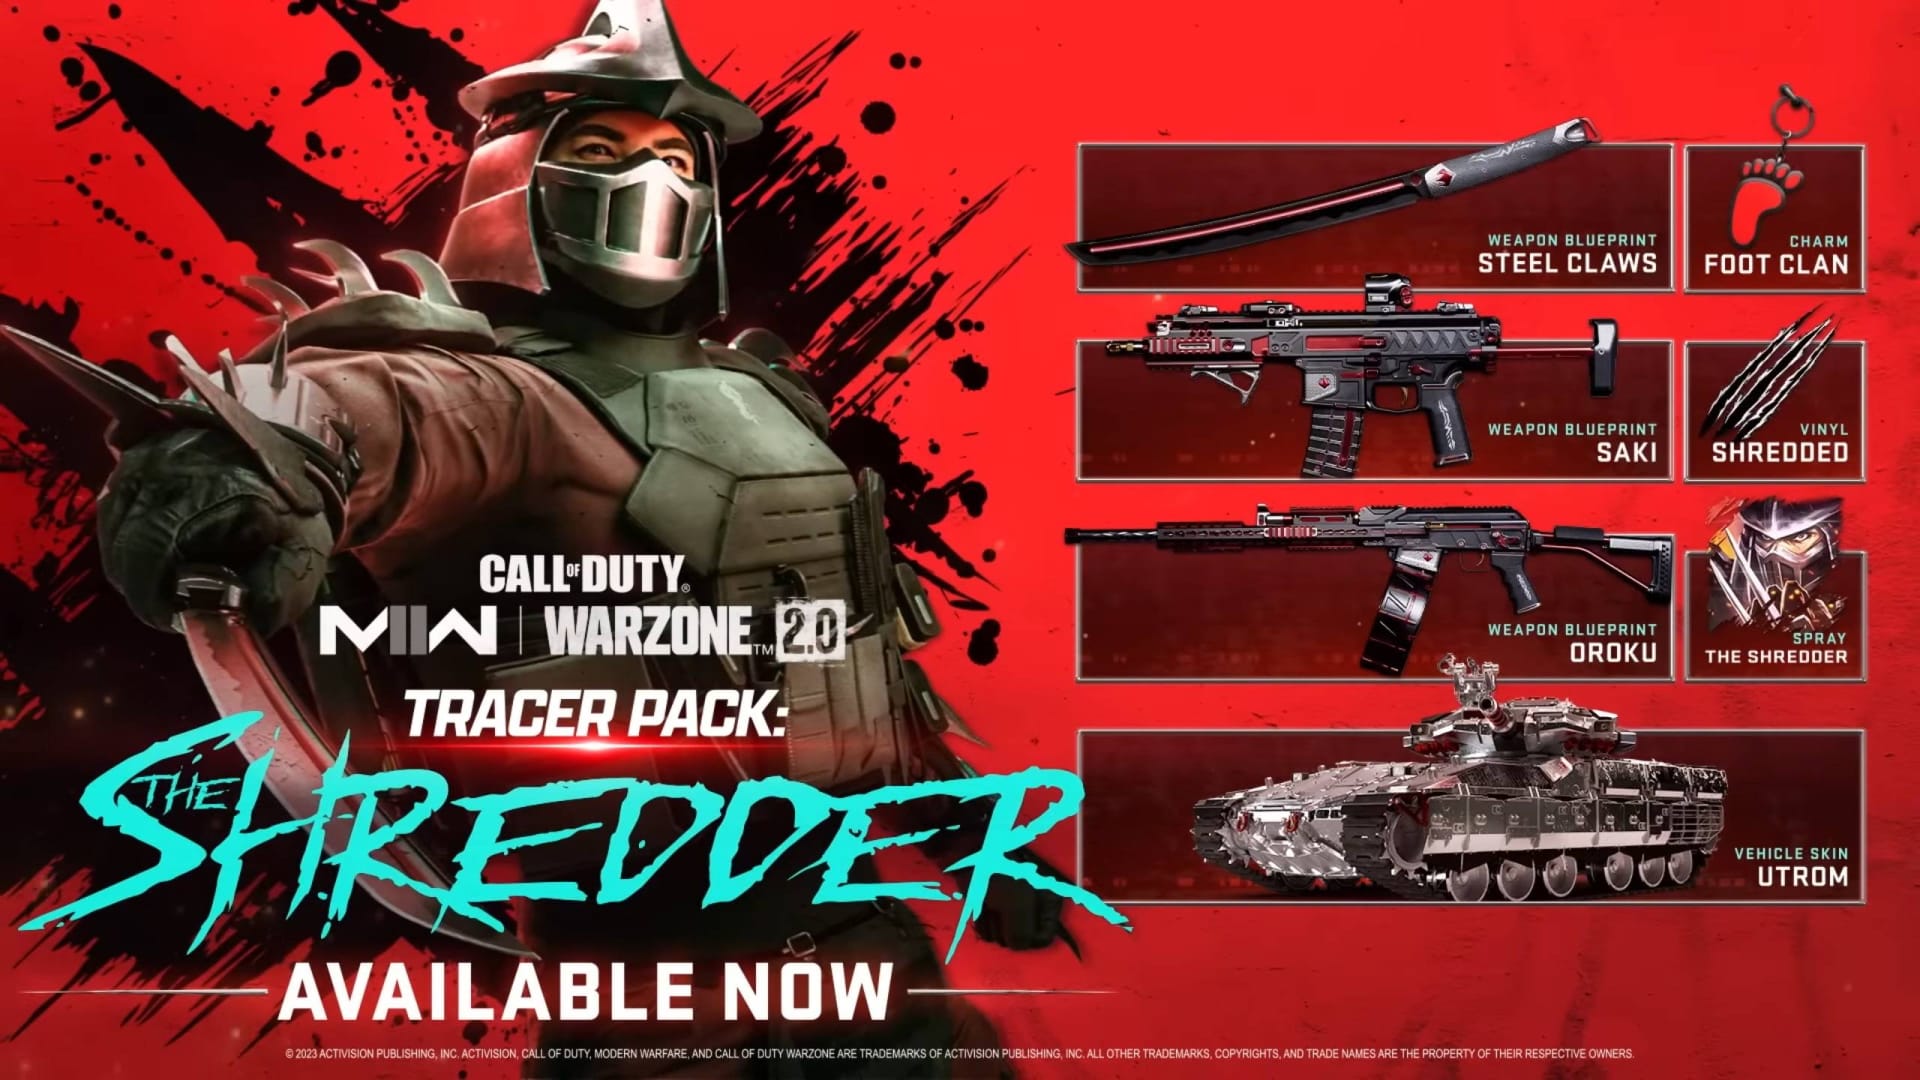 Shredder in Call of Duty Modern Warfare II & Warzone 2.0 - Content of the package